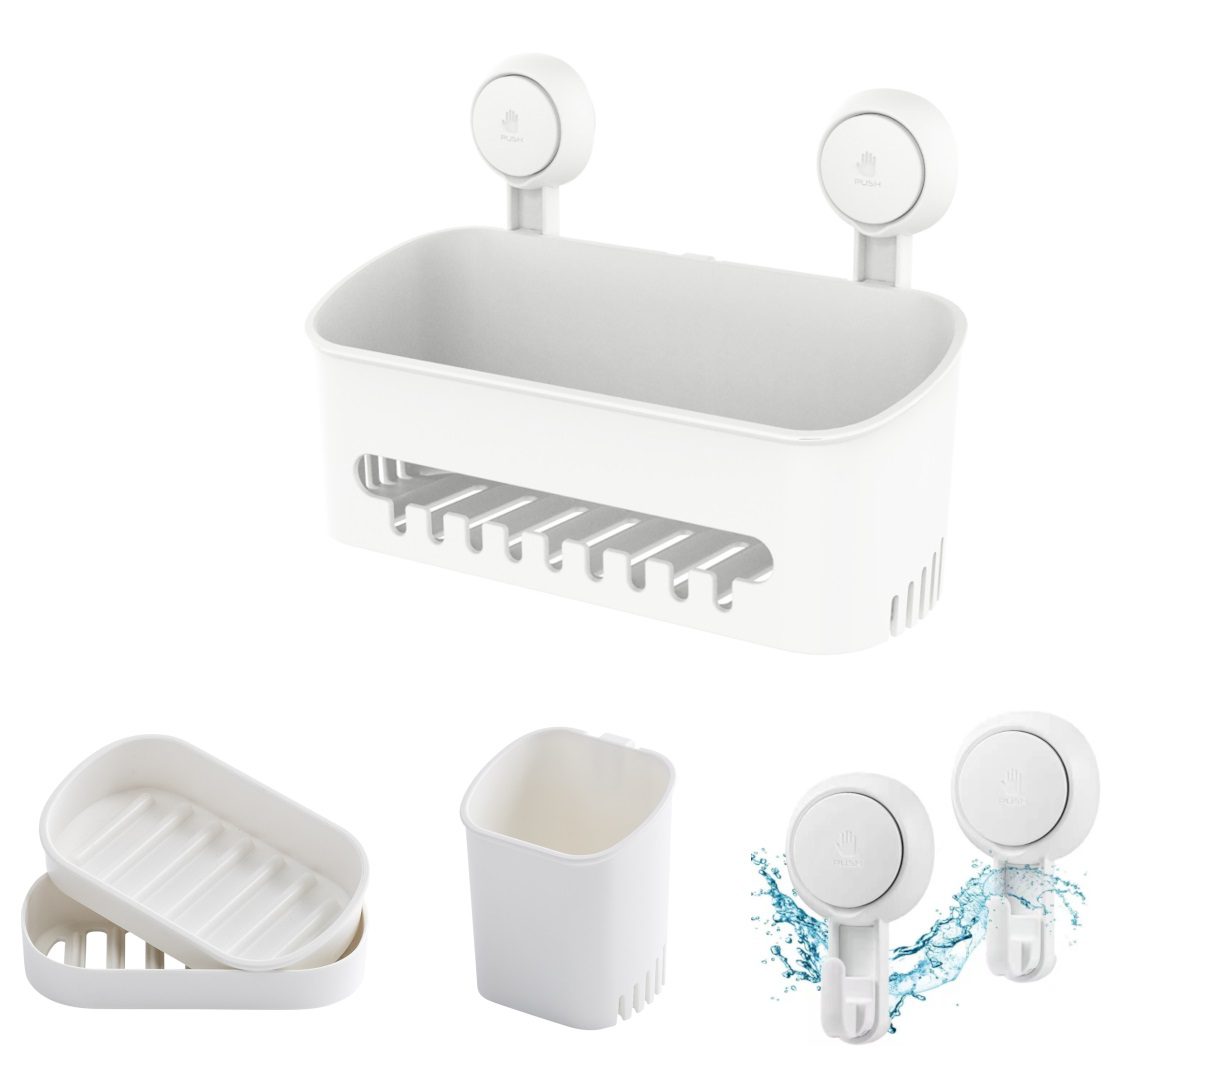 Shower Caddy Suction cup– 3pcs Bathroom Accessories Includes Soap Dish, Toothbrush Holder - Shower Shelf Set – No drilling, Adjustable, Nice Organizer Caddy Suitable for bathroom and Kitchen - White